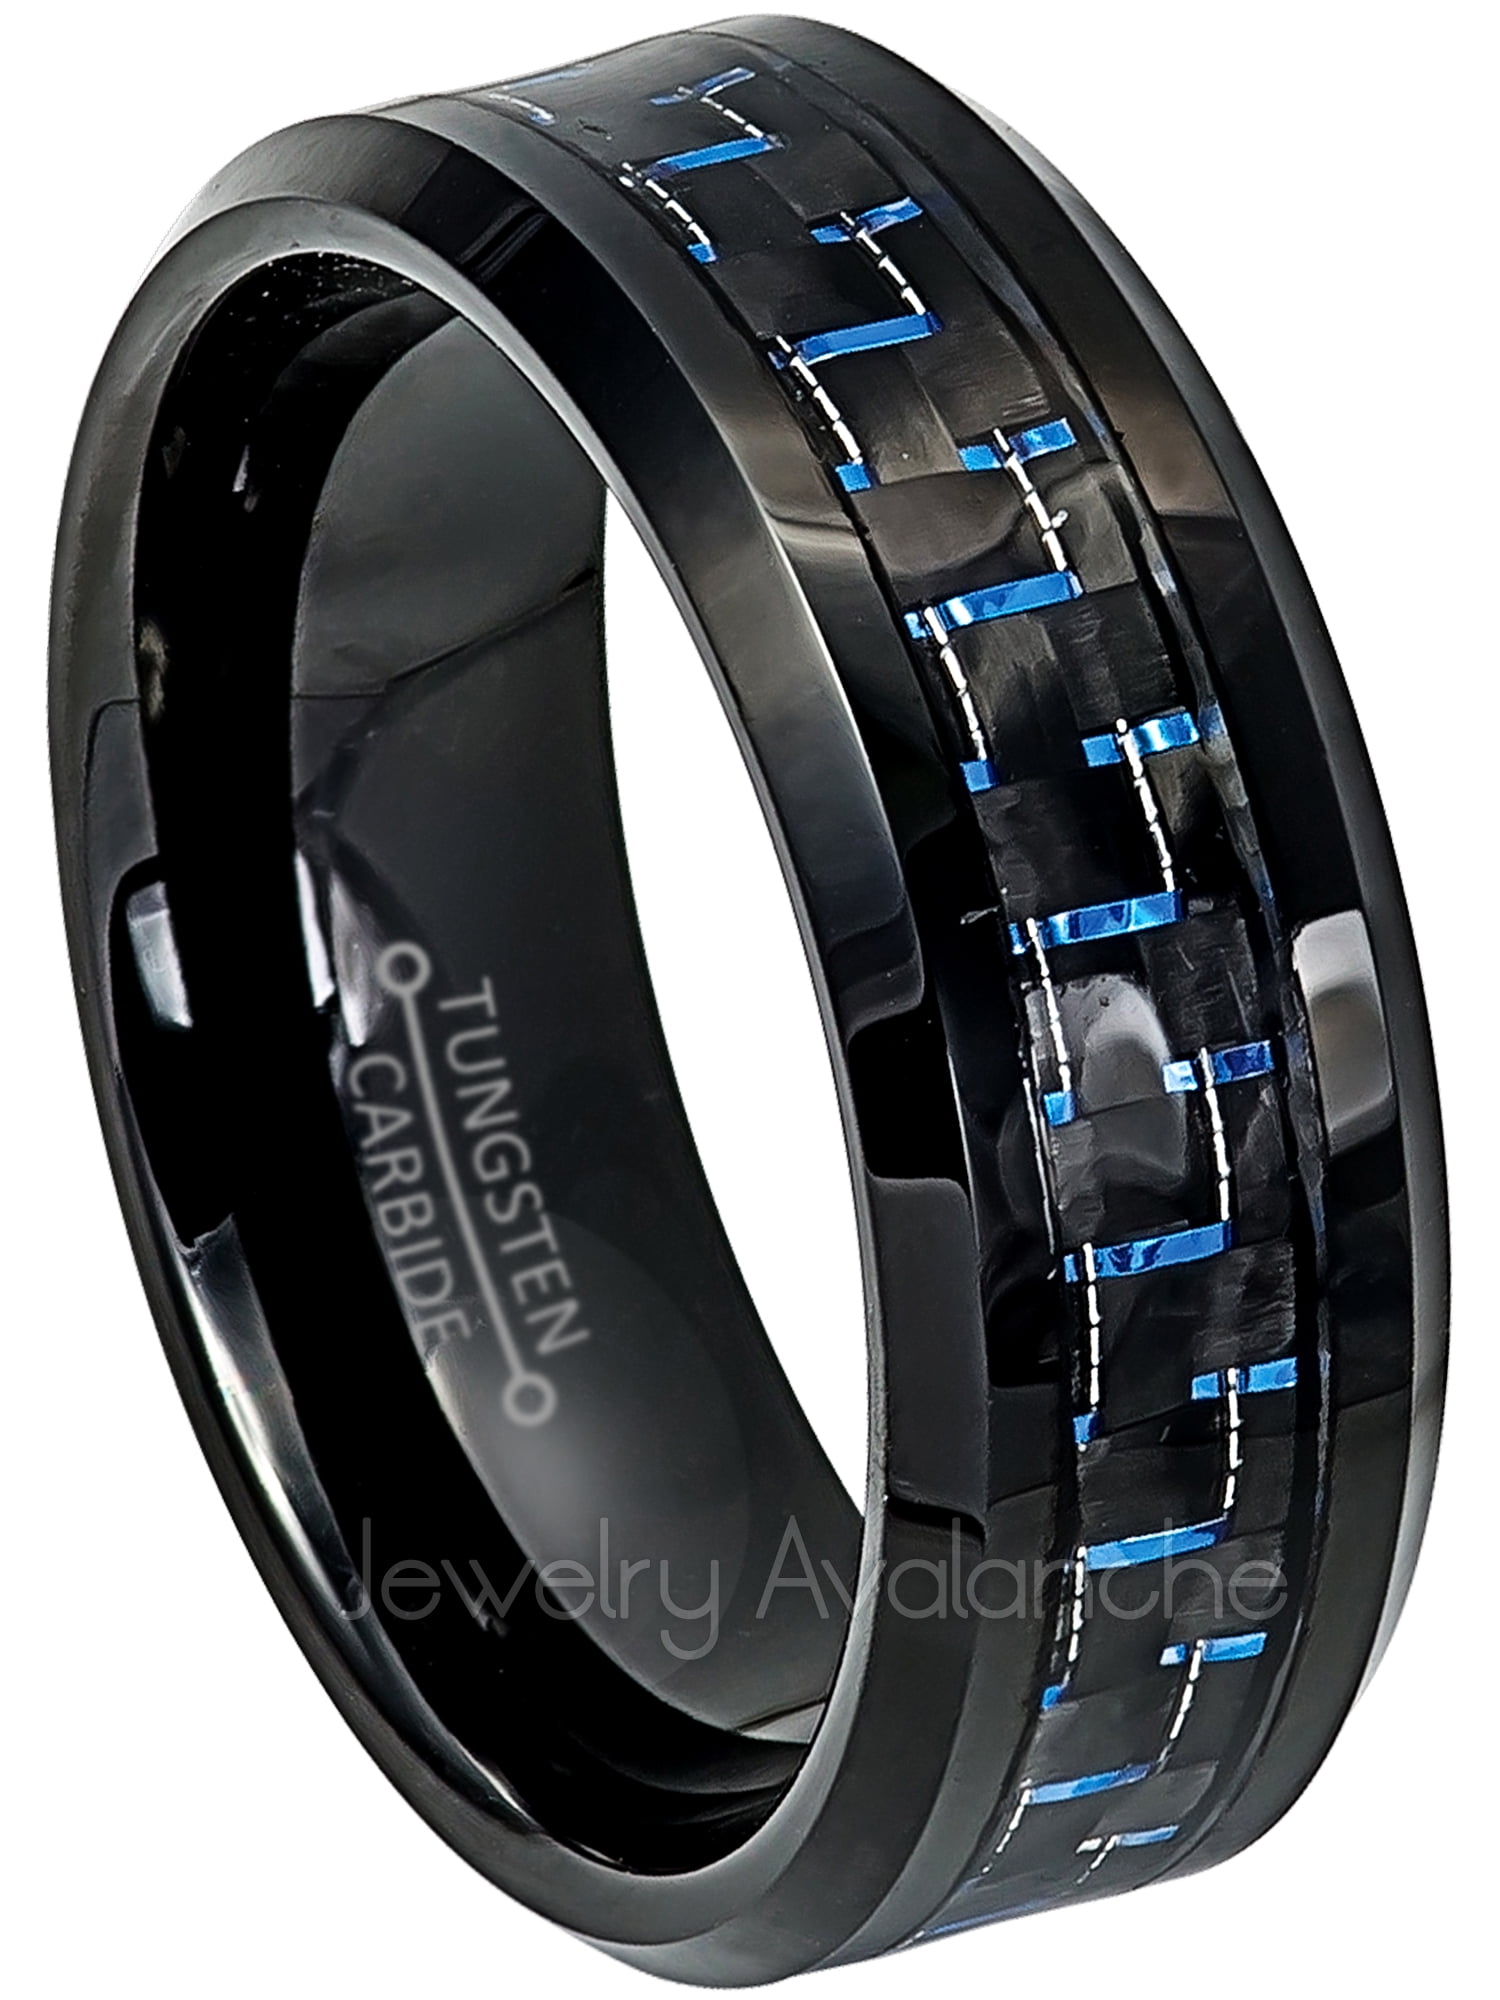 8mm Tungsten Carbide Ring Black Carbon Fiber Inlay Wedding Band Mens Jewelry 